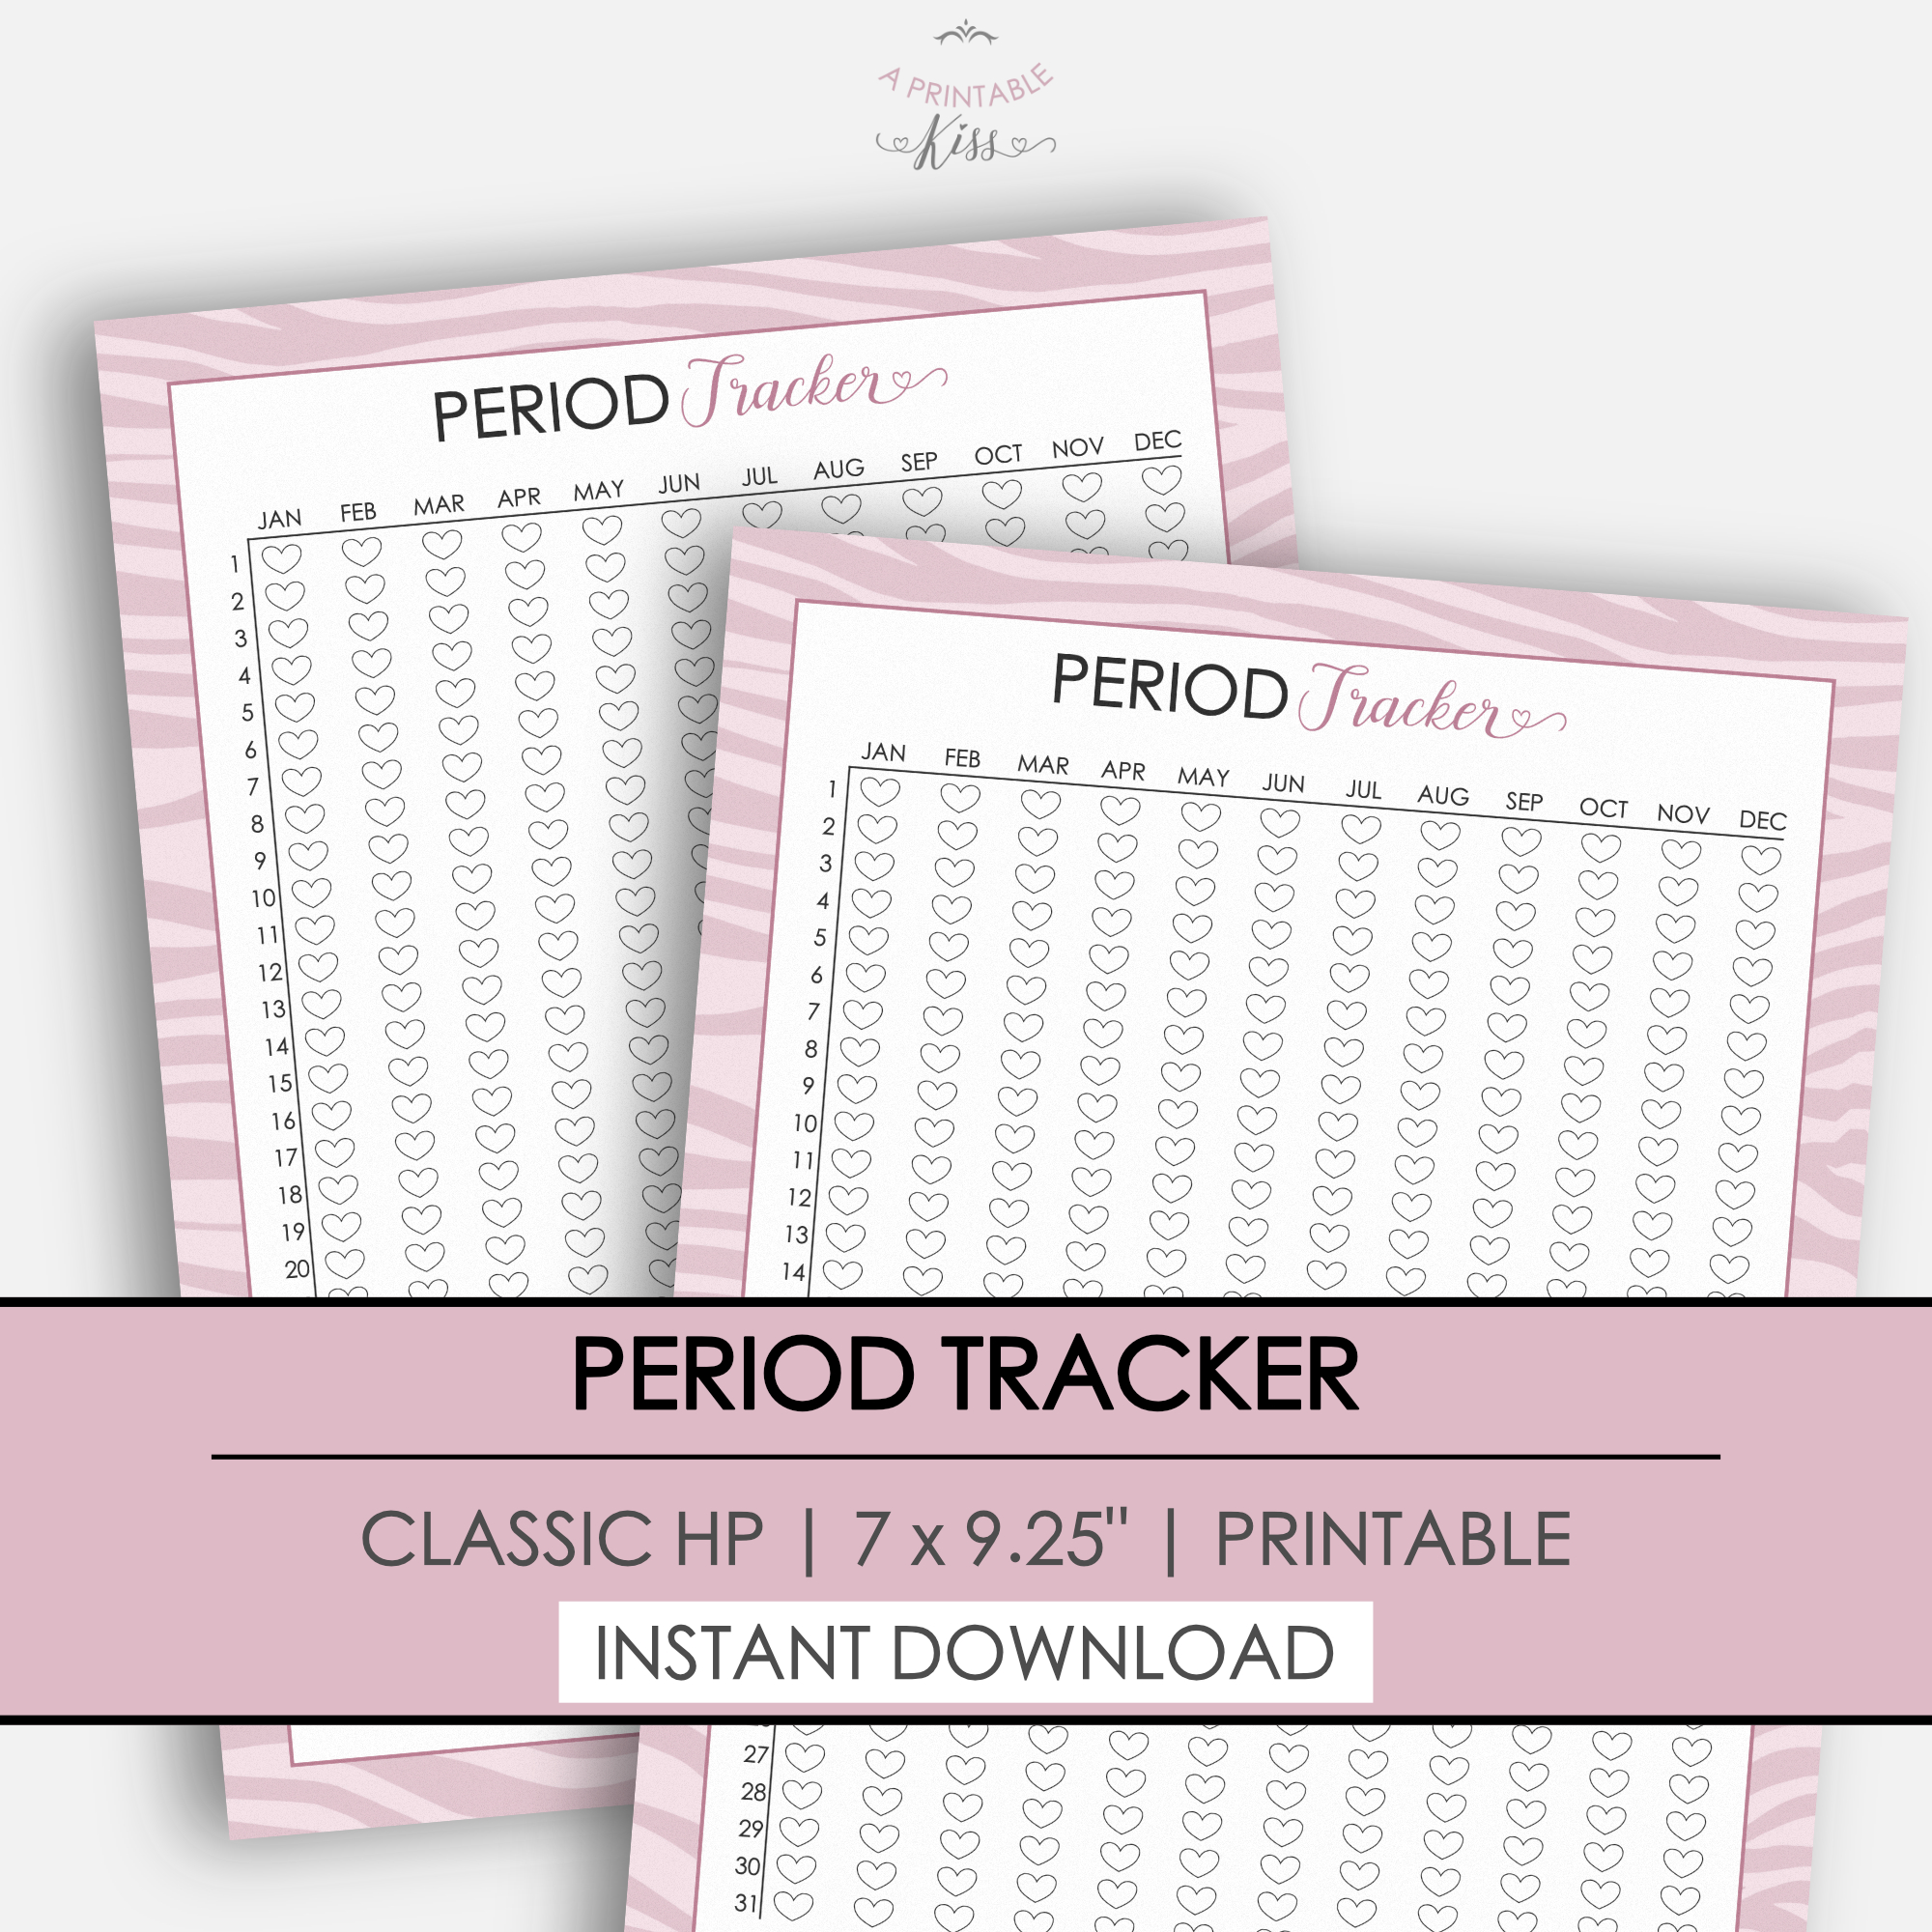 Classic Hp Printable Period Tracker Menstrual Cycle